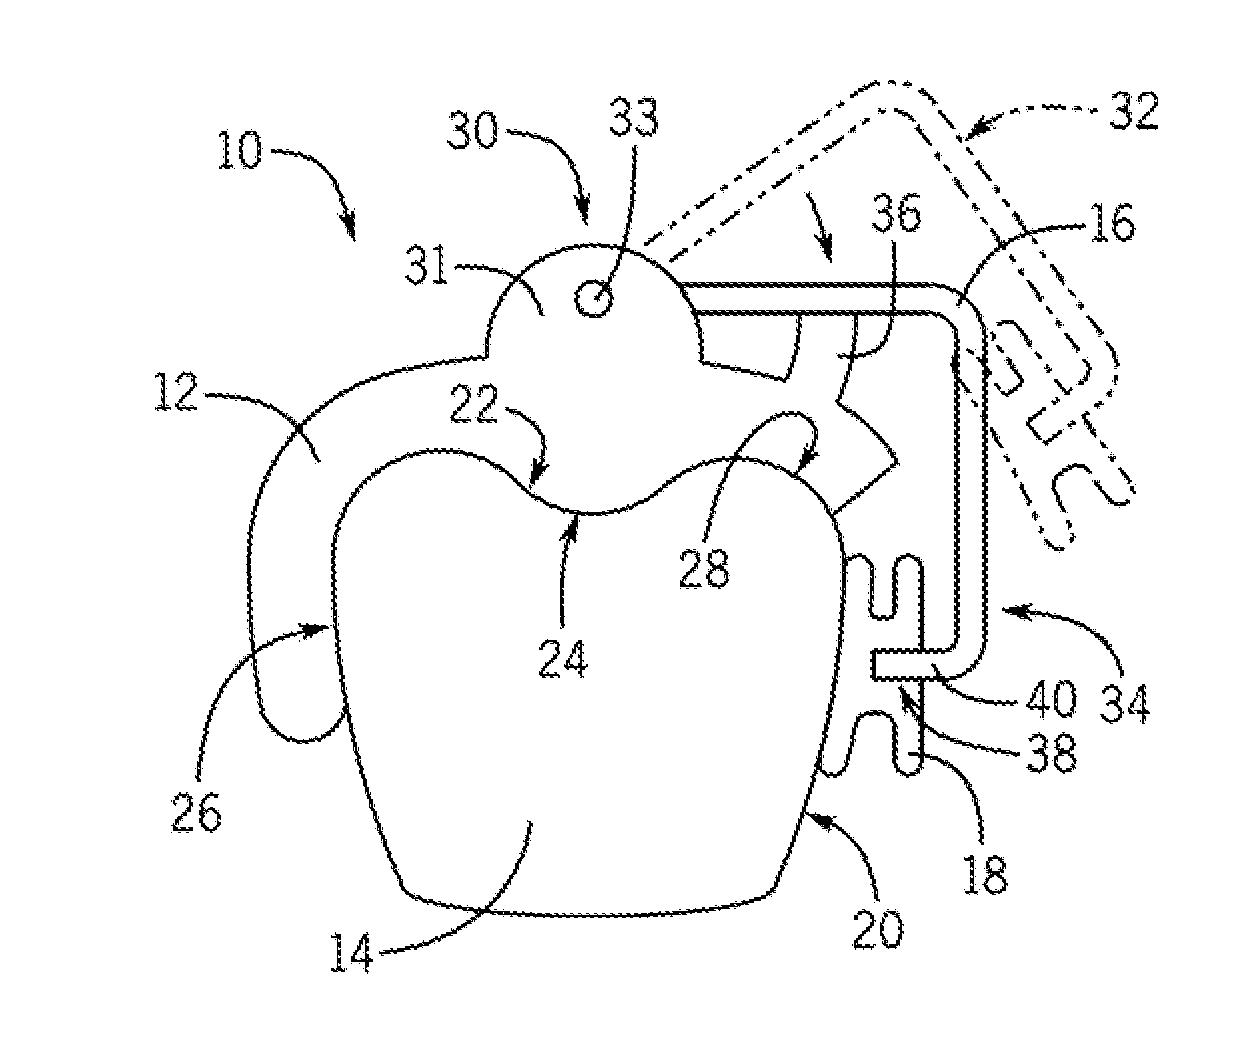 Indirect Bonding Tray and Method of Manufacture Thereof